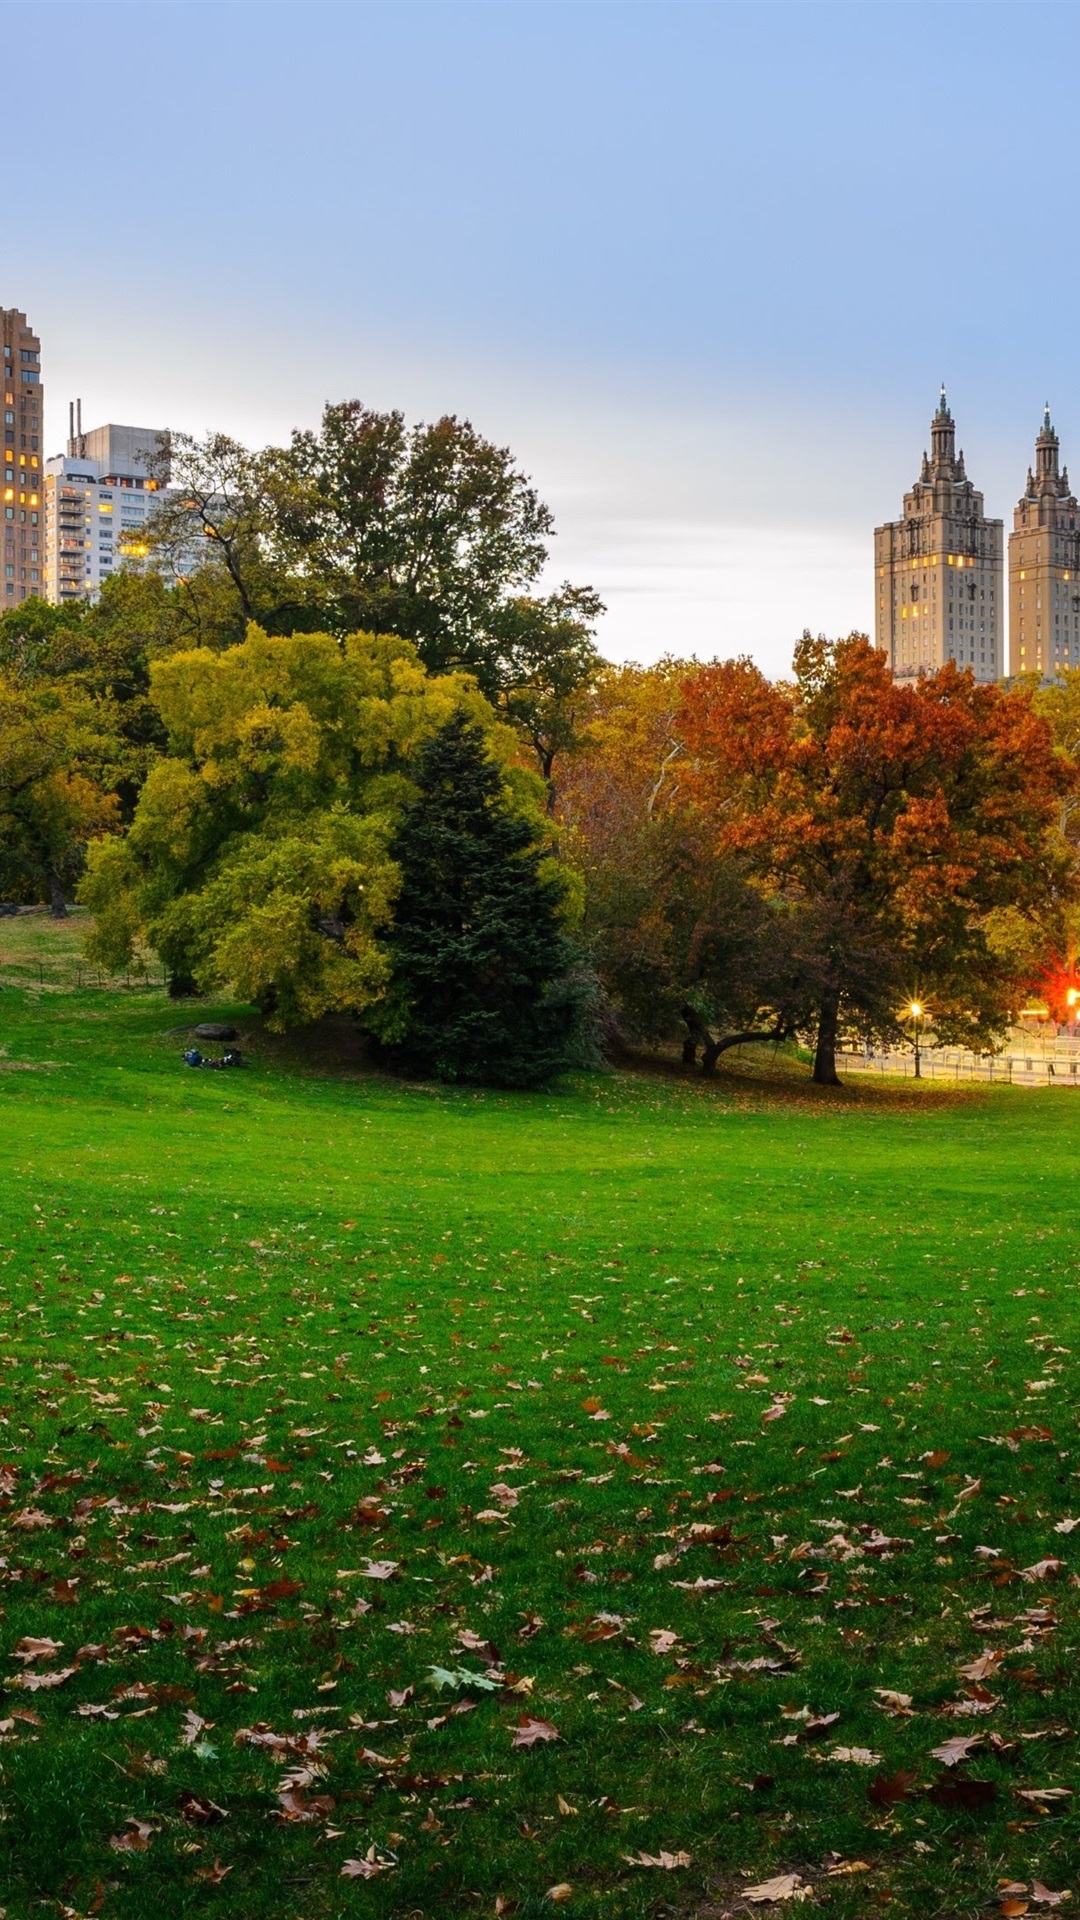 USA, New York, Central Park, Skyscrapers, Lawn, Trees, Autumn 1080x1920 IPhone 8 7 6 6S Plus Wallpaper, Background, Picture, Image